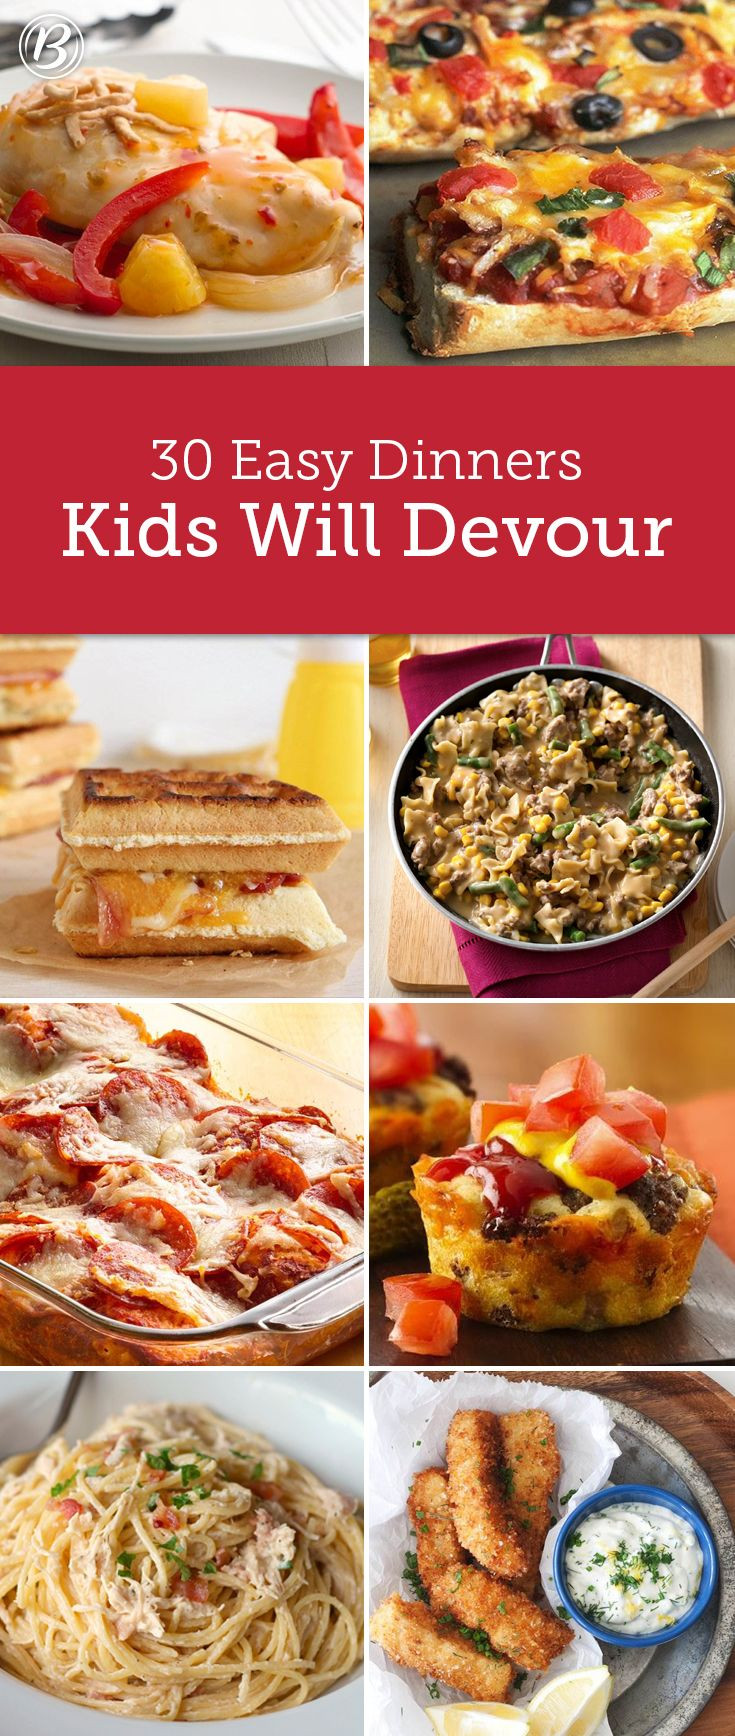 Easy Healthy Kid Friendly Dinners
 Kids’ Most Requested Dinners Family Dinners